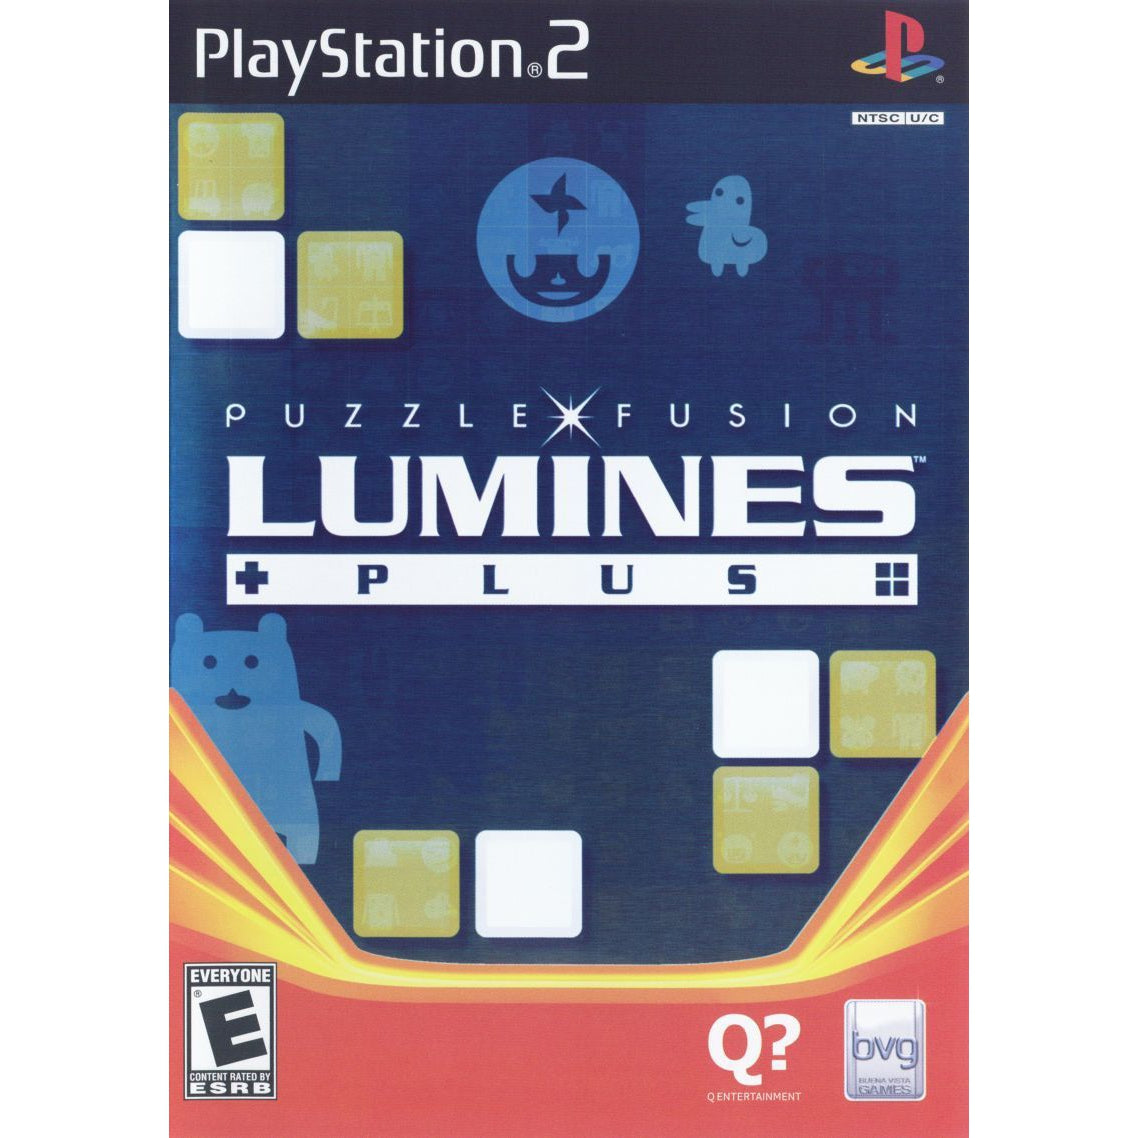 Lumines: Puzzle Fusion - PlayStation 2 (PS2) Game Complete - YourGamingShop.com - Buy, Sell, Trade Video Games Online. 120 Day Warranty. Satisfaction Guaranteed.